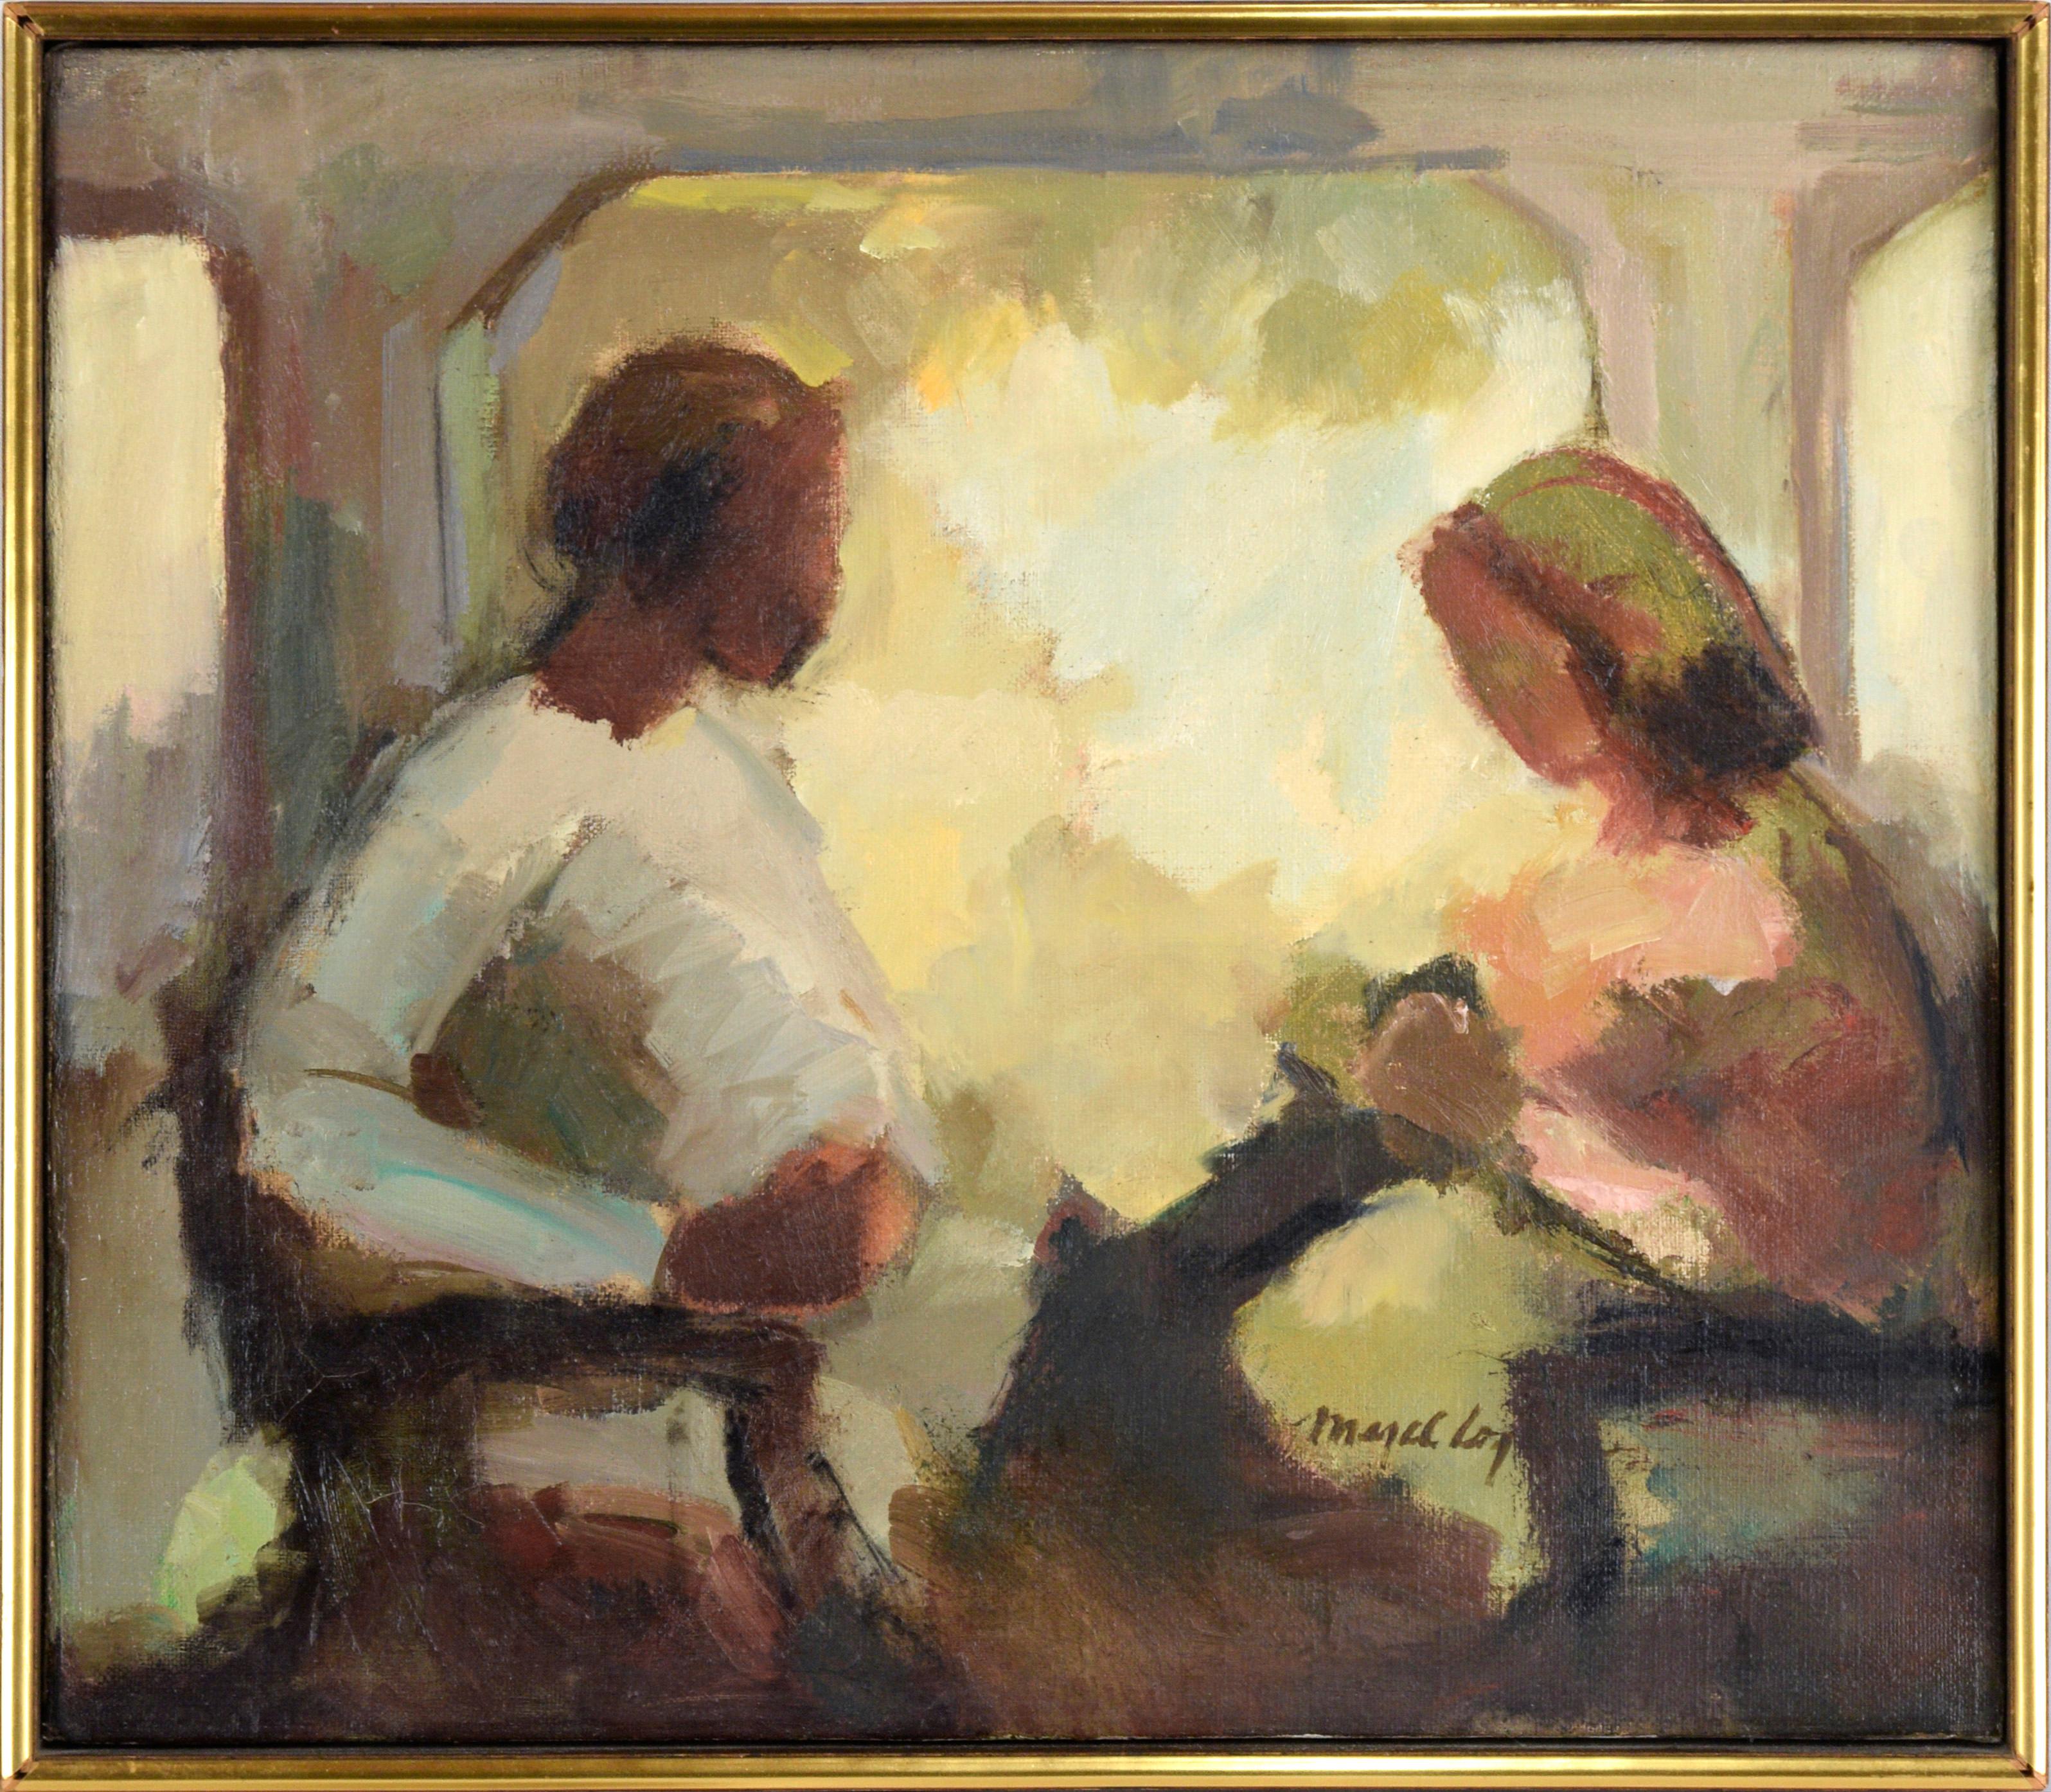 "Porch People" - Figurative Composition in Oil on Linen